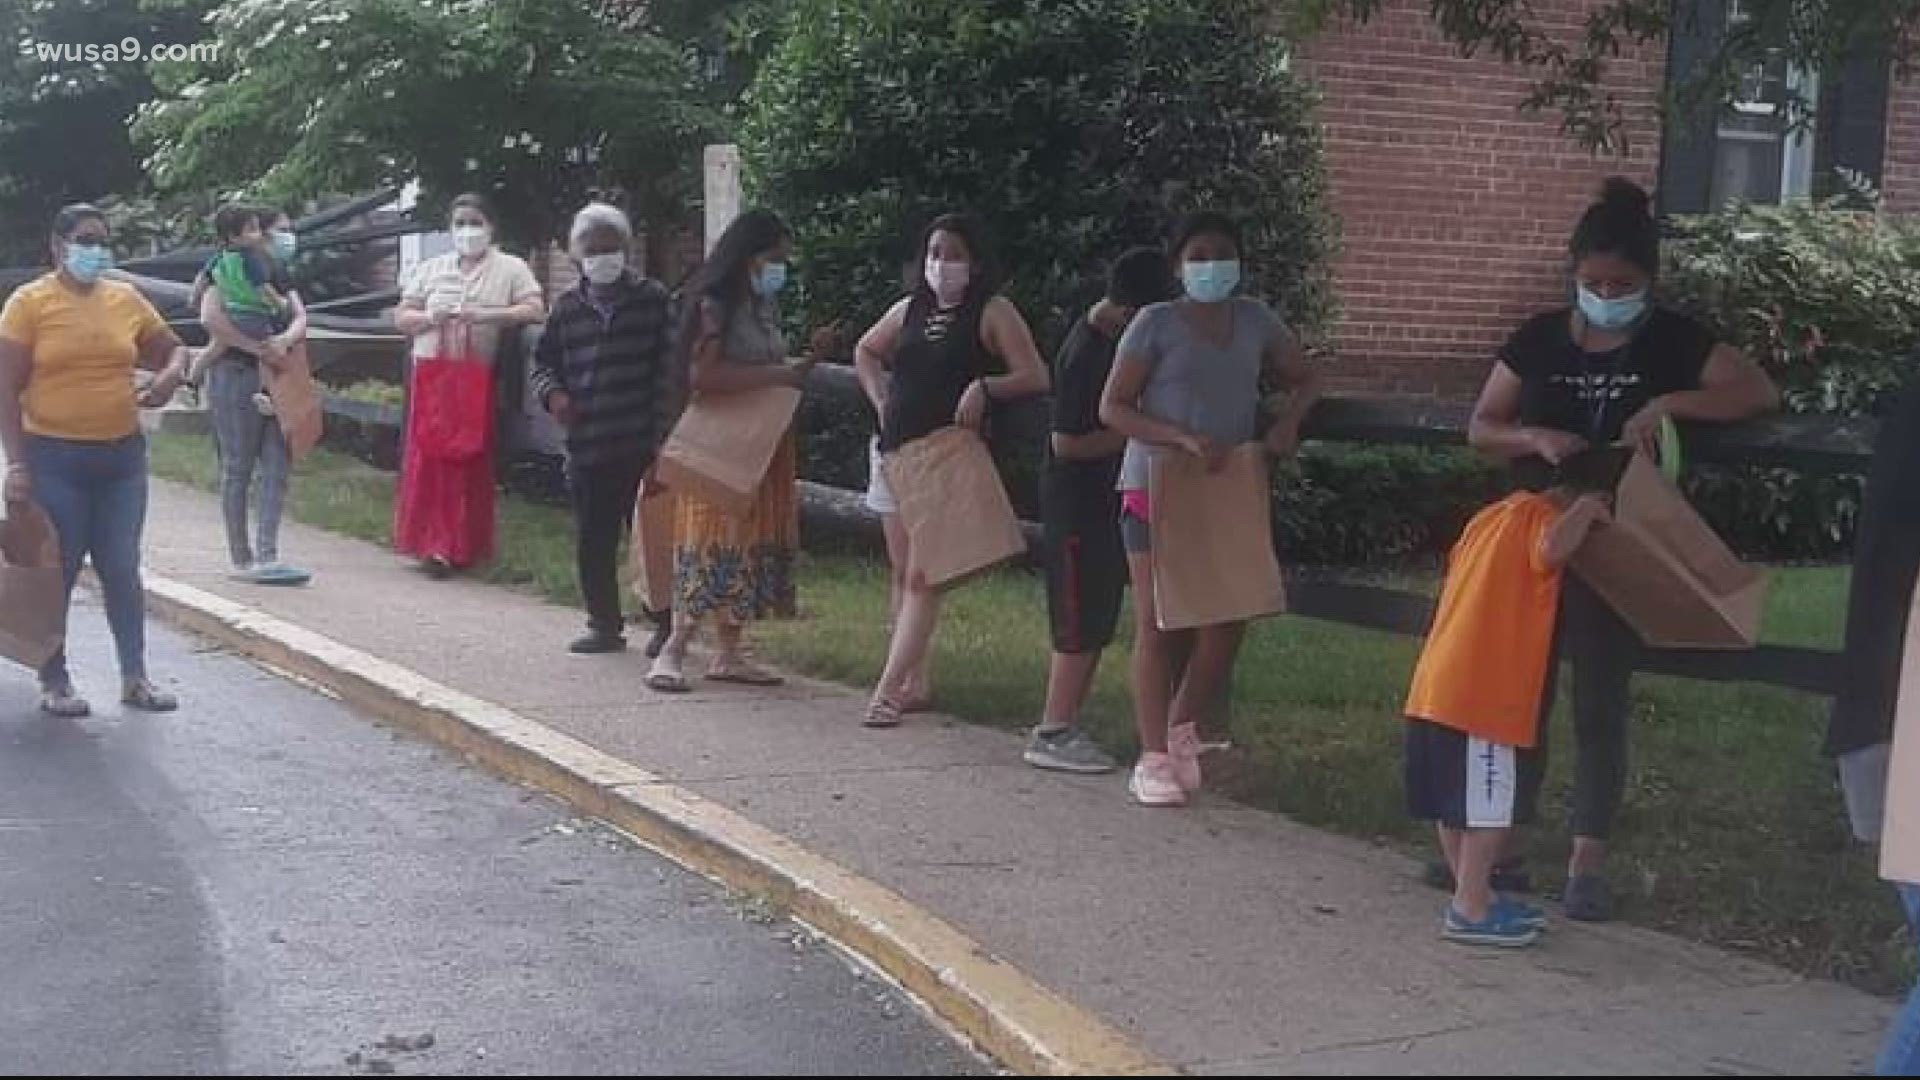 An Arlington woman took it upon herself to help immigrant families in her neighborhood who were suffering during the pandemic. She said many of them lost their jobs.